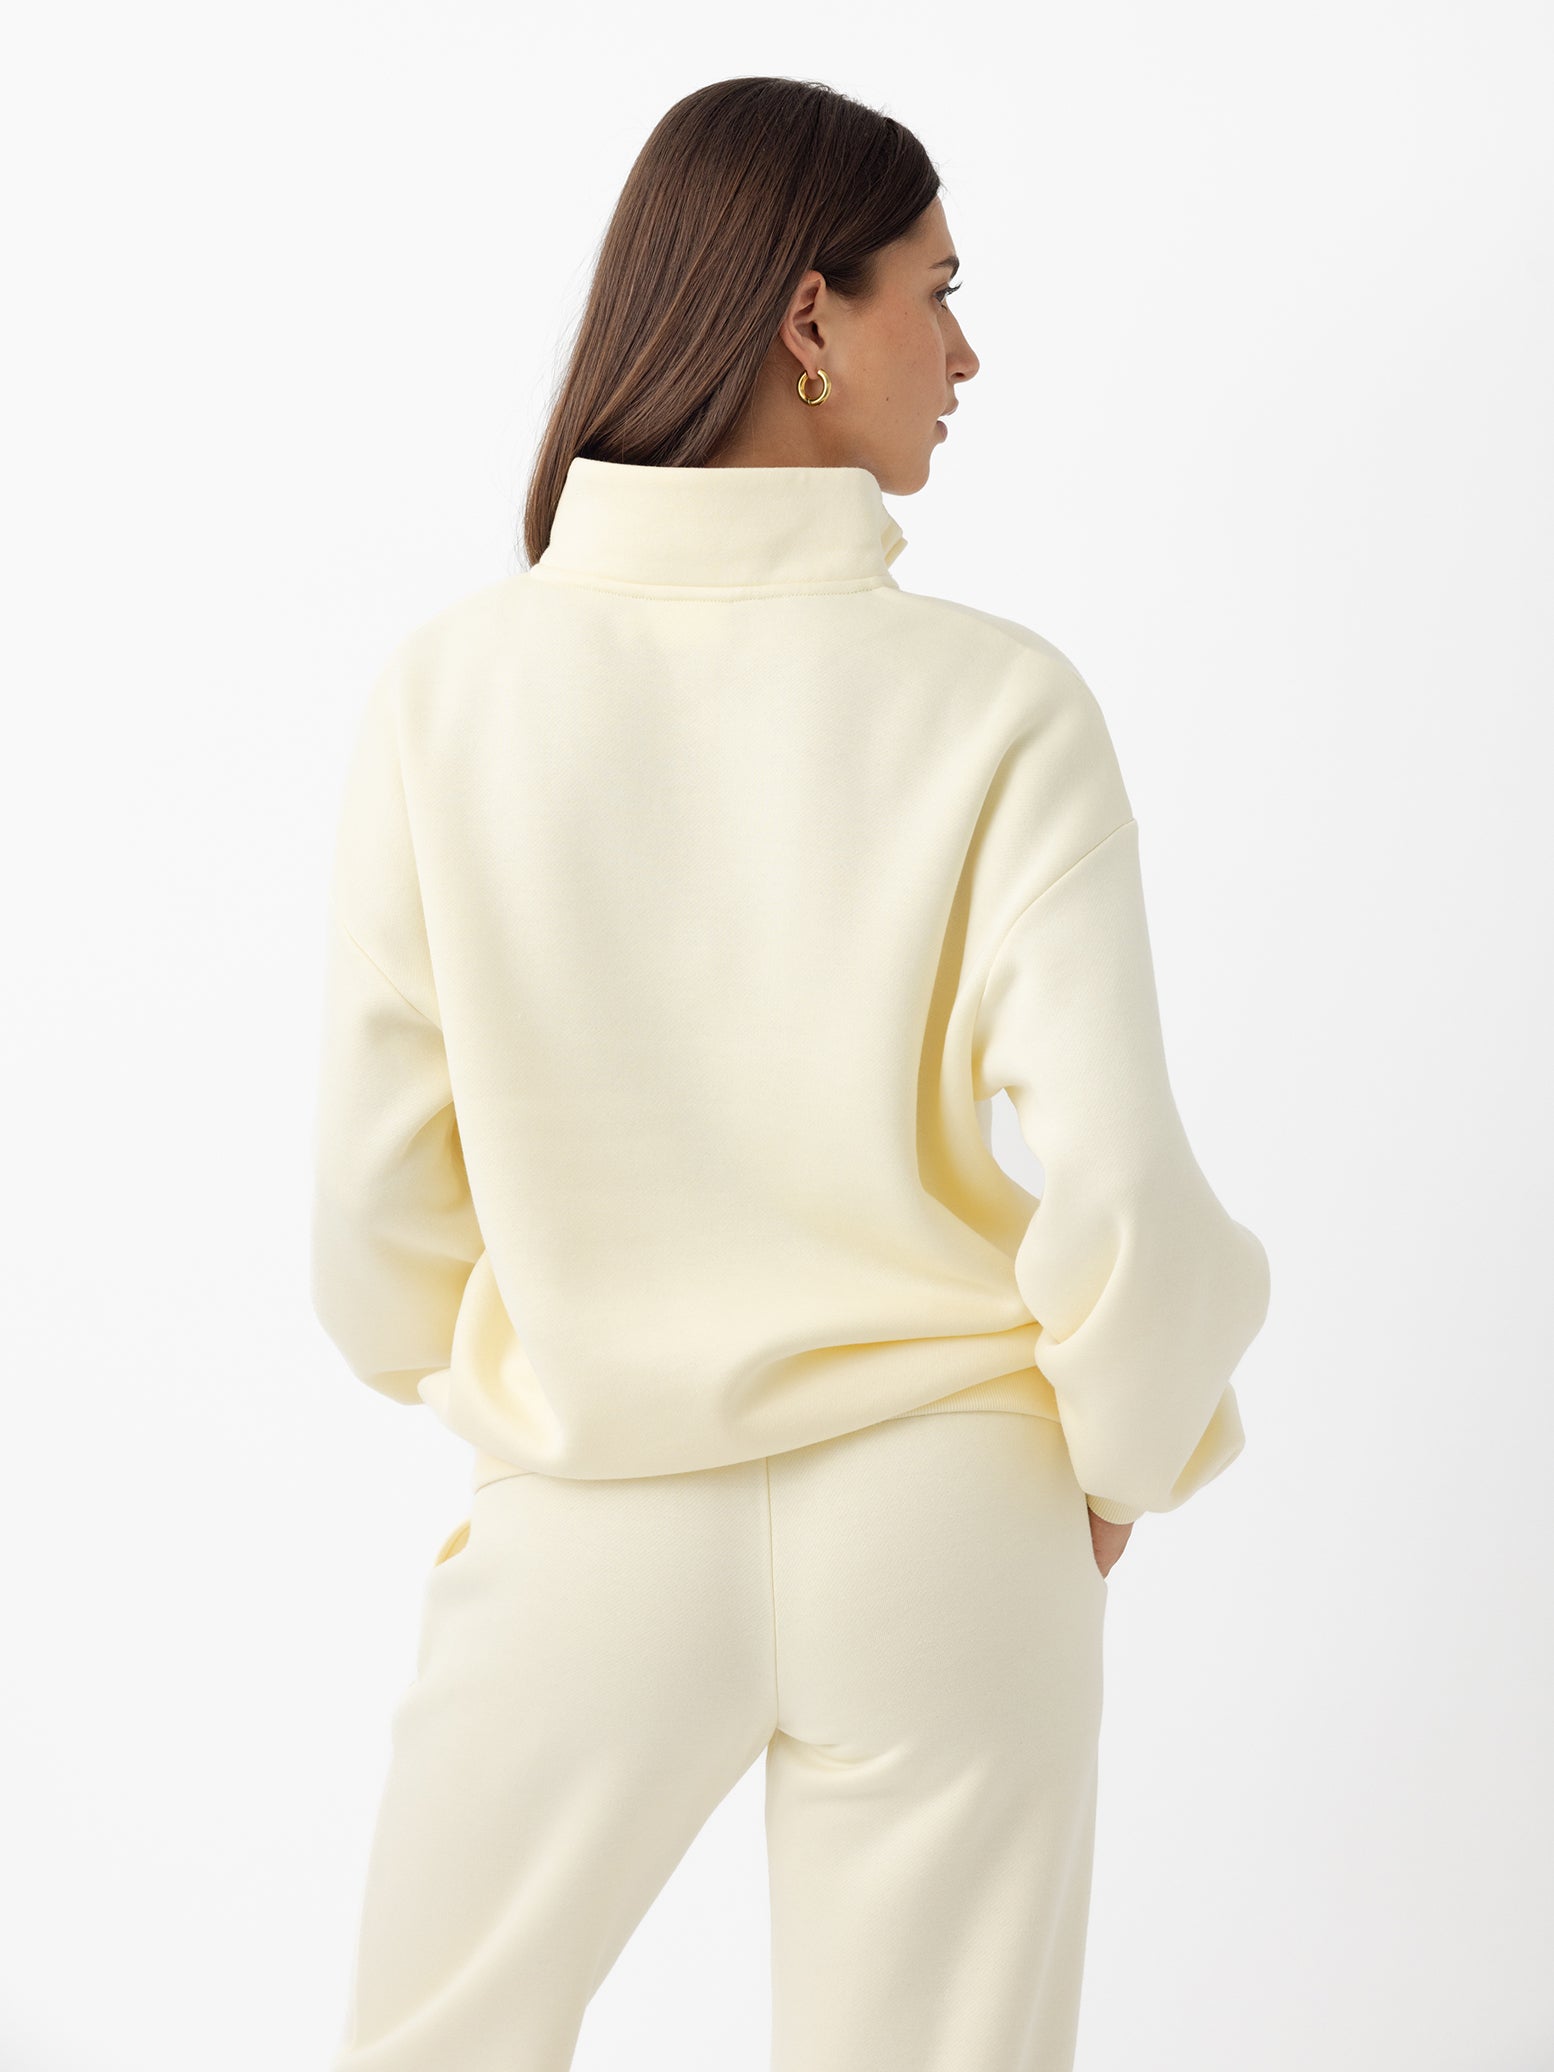 Lemonade CityScape Quarter Zip. The quarter zip is being worn by a female model. The model is wearing accompanying CityScape clothing to complete the look of the quarter zip. The photo was taken with a white background. 